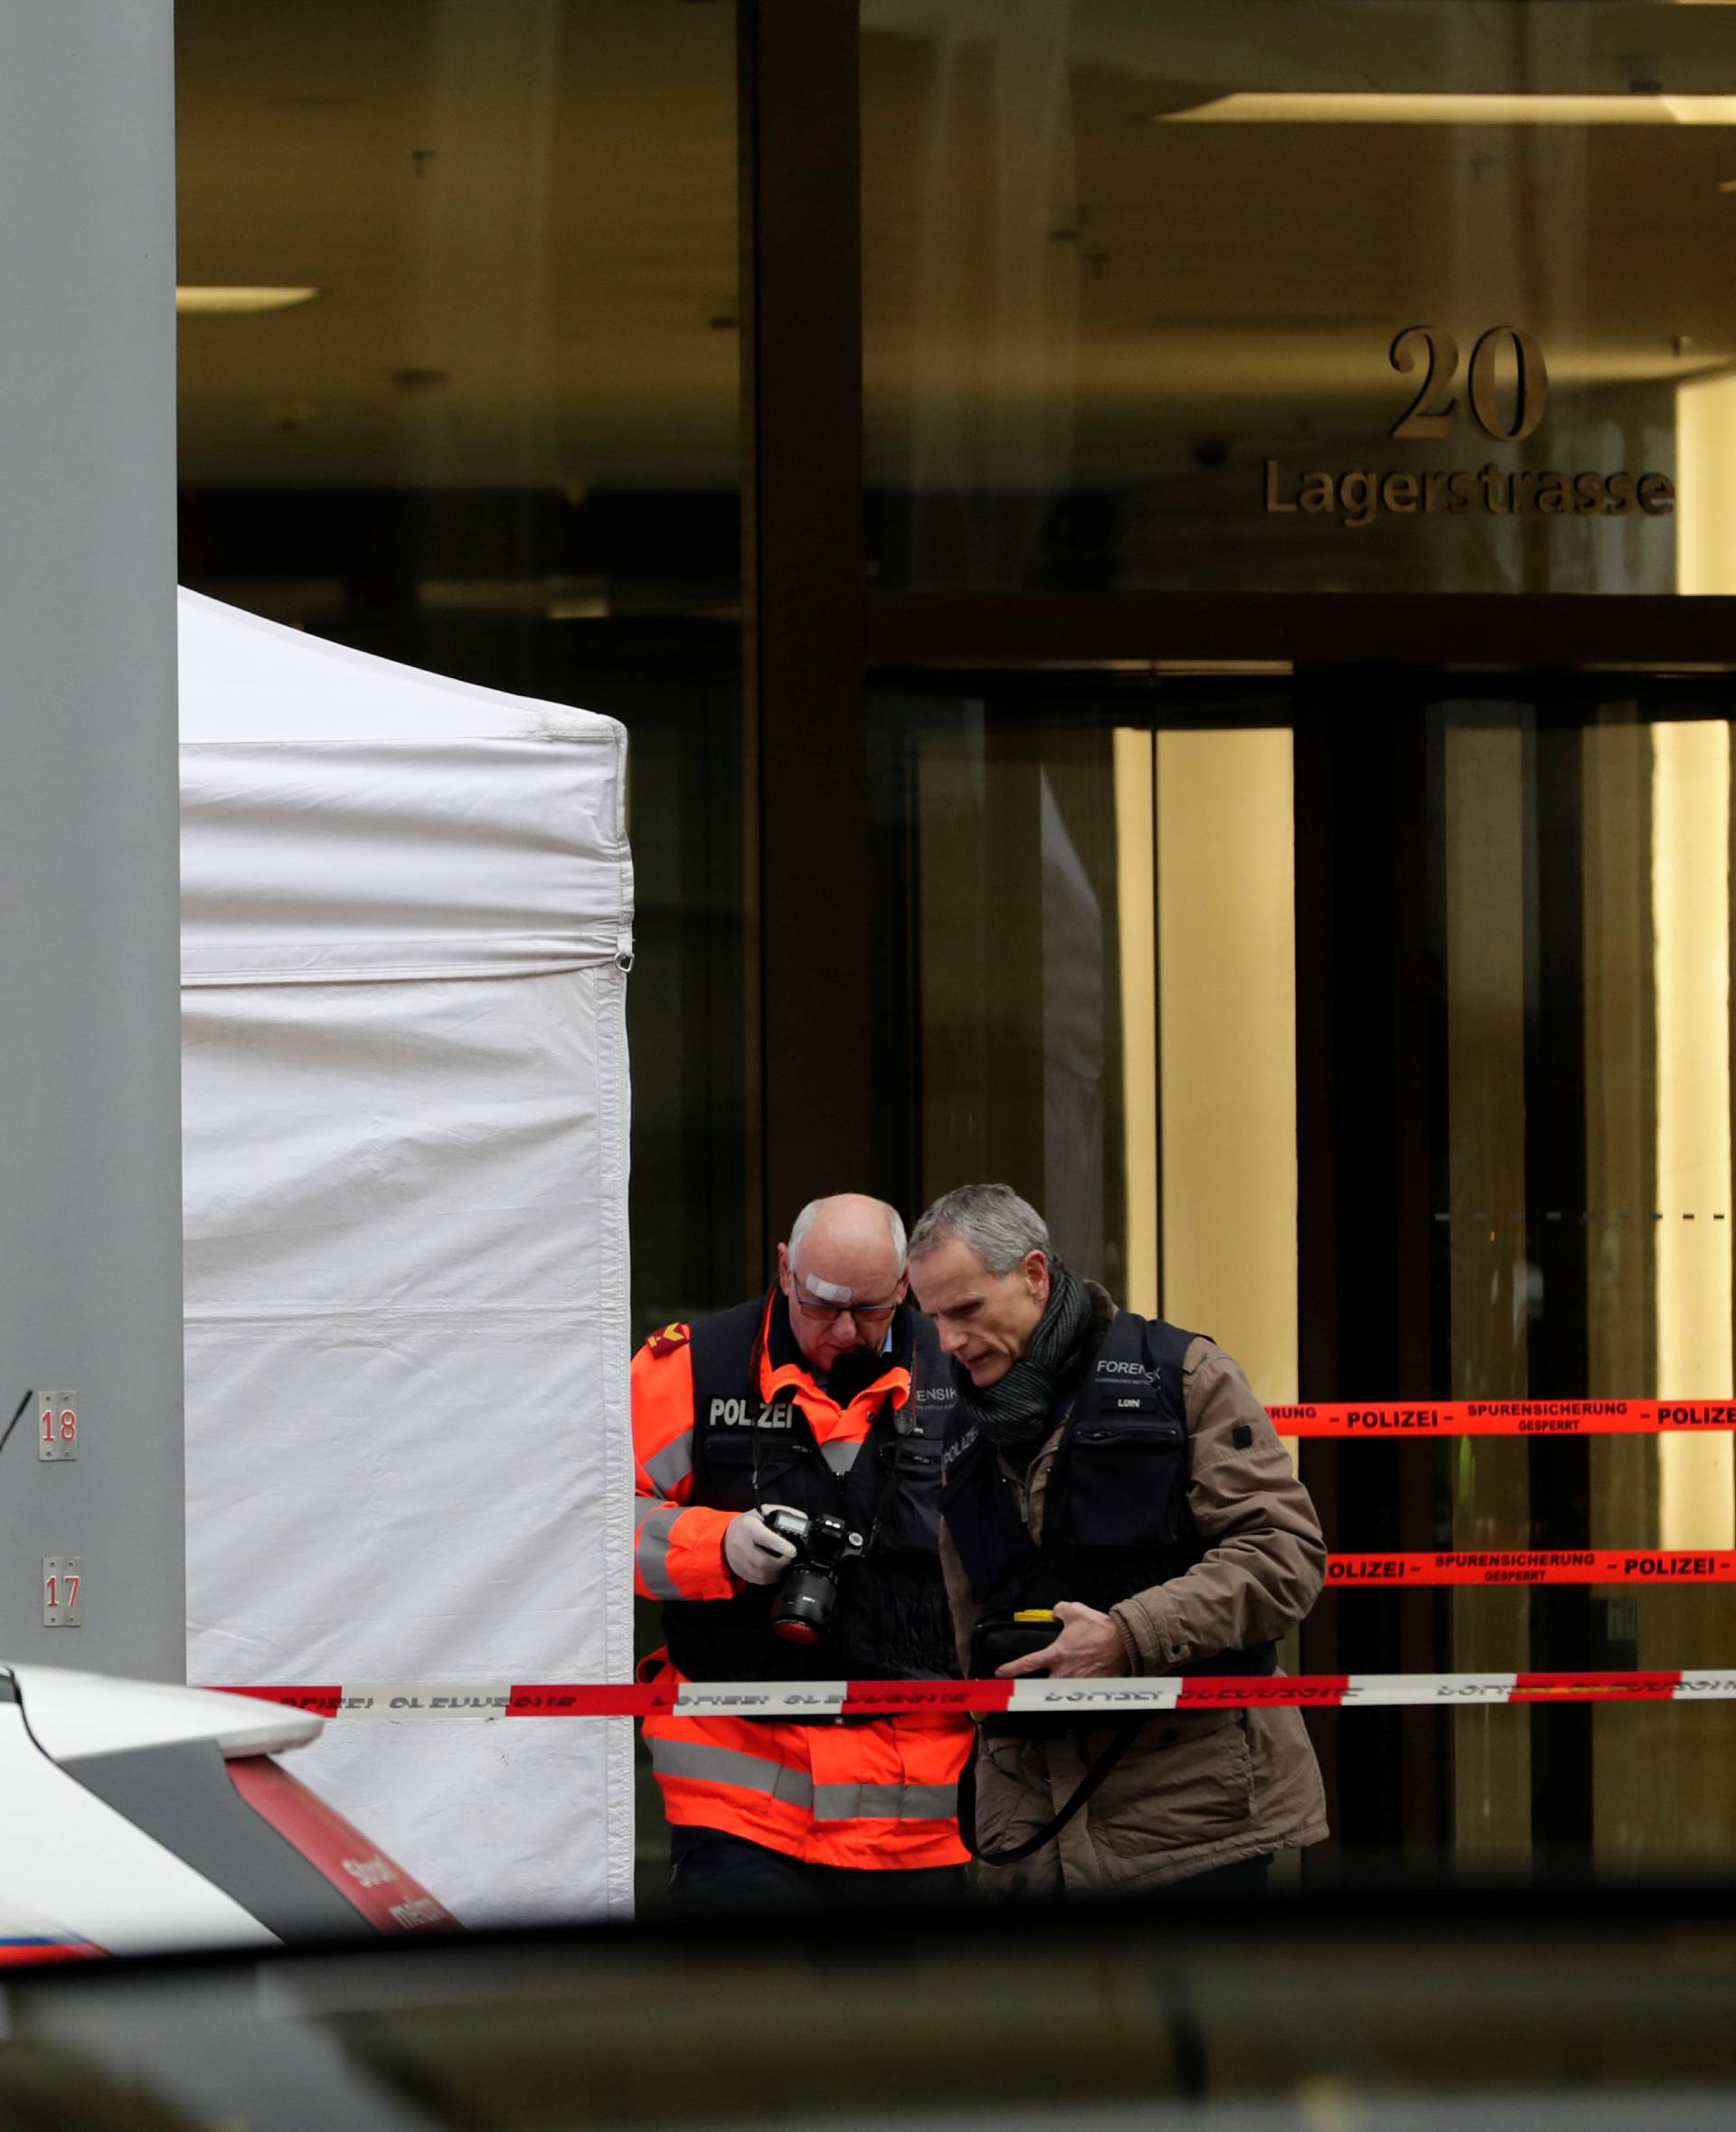 Police investigate a crime scene after two people, police said, were killed in Zurich